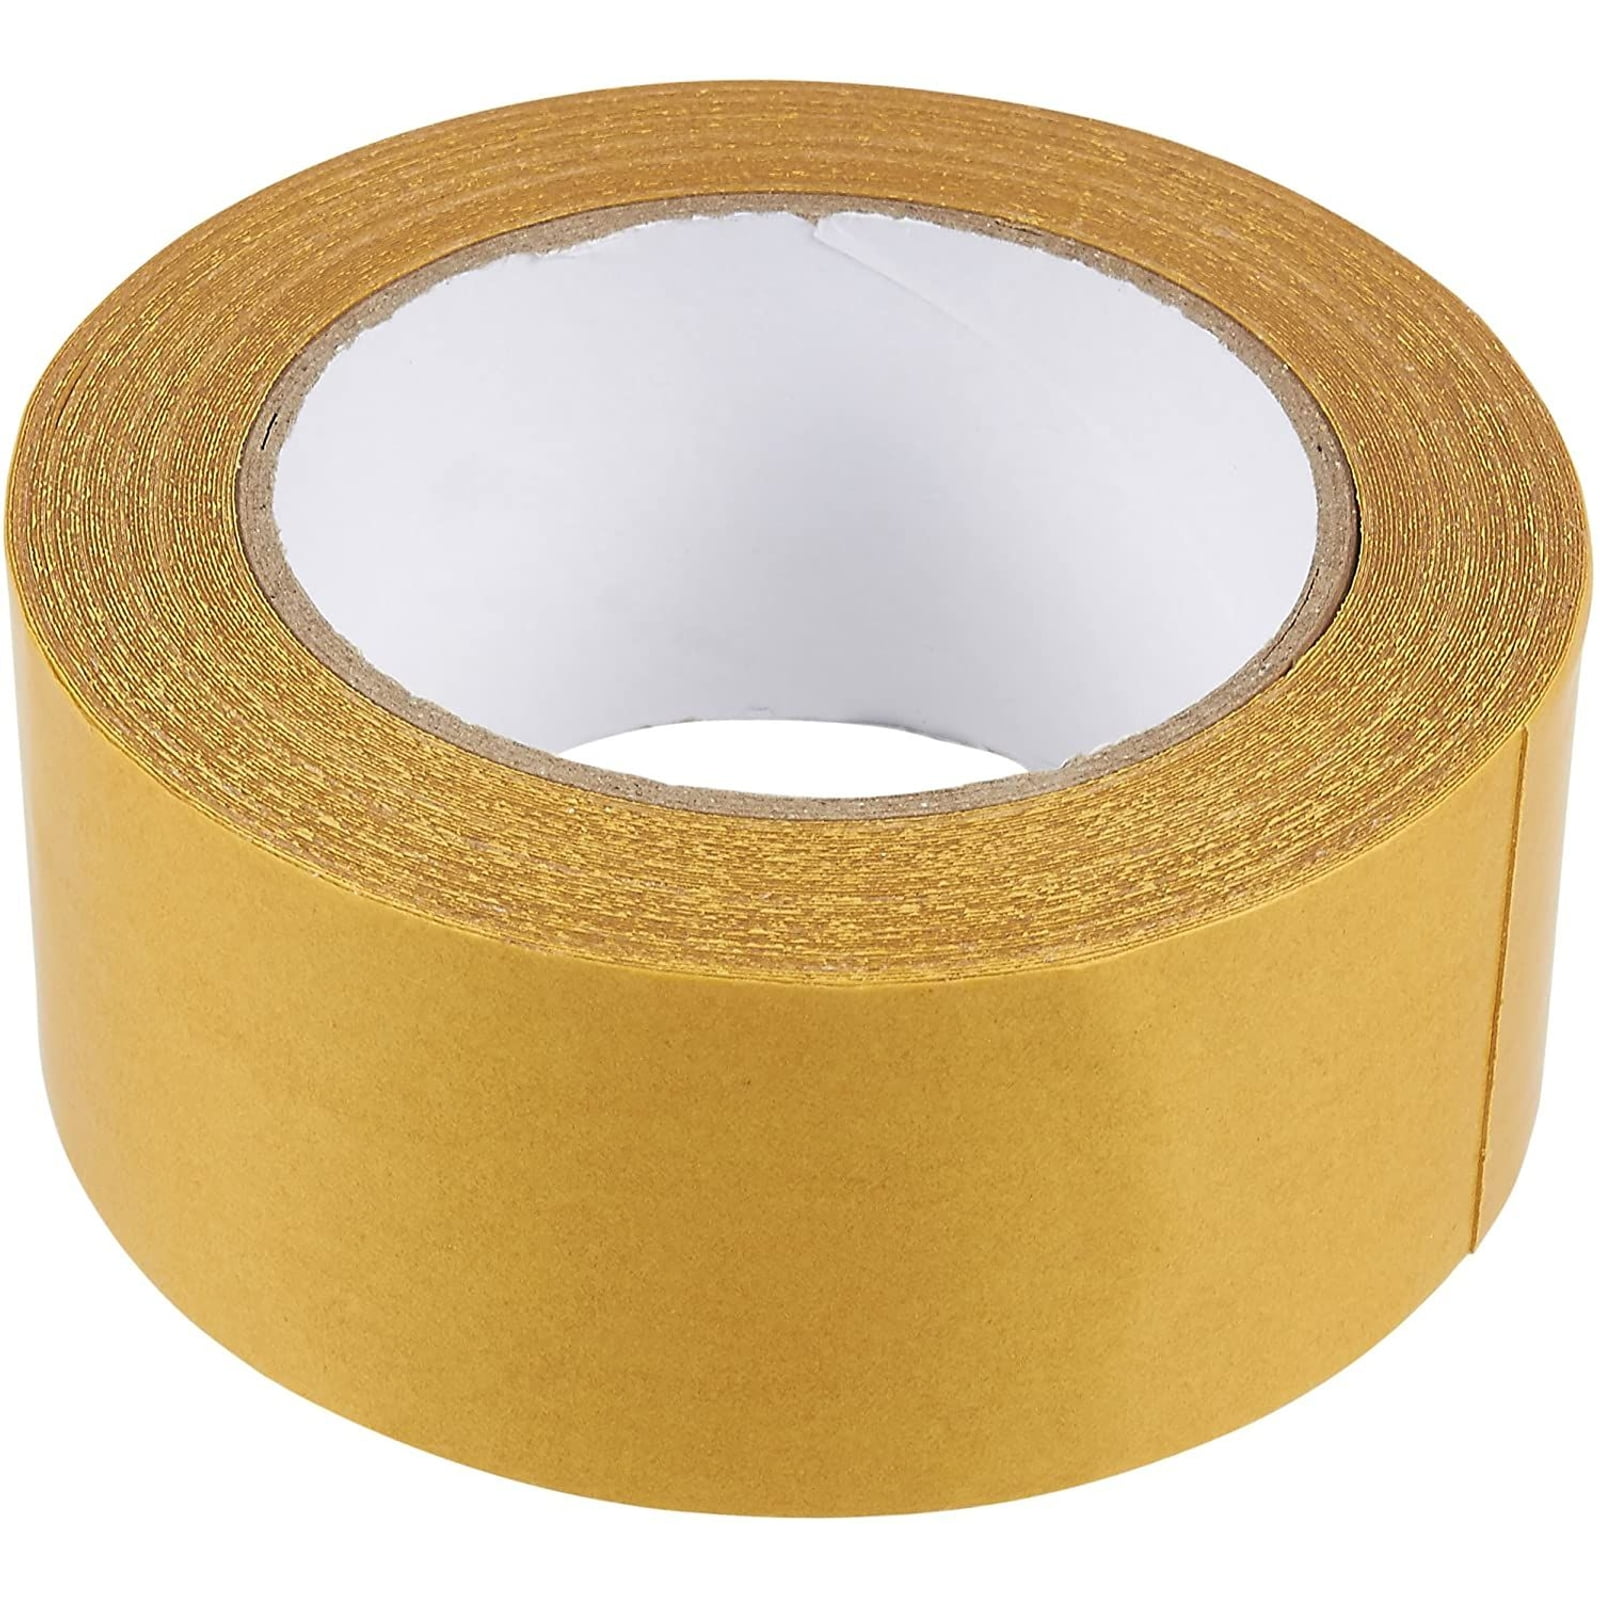 Yards Heavy Duty Removable Outdoor Cloth Double Sided Carpet Tape for Area  Rugs - China Best Carpet Tape, Shurtape Carpet Tape